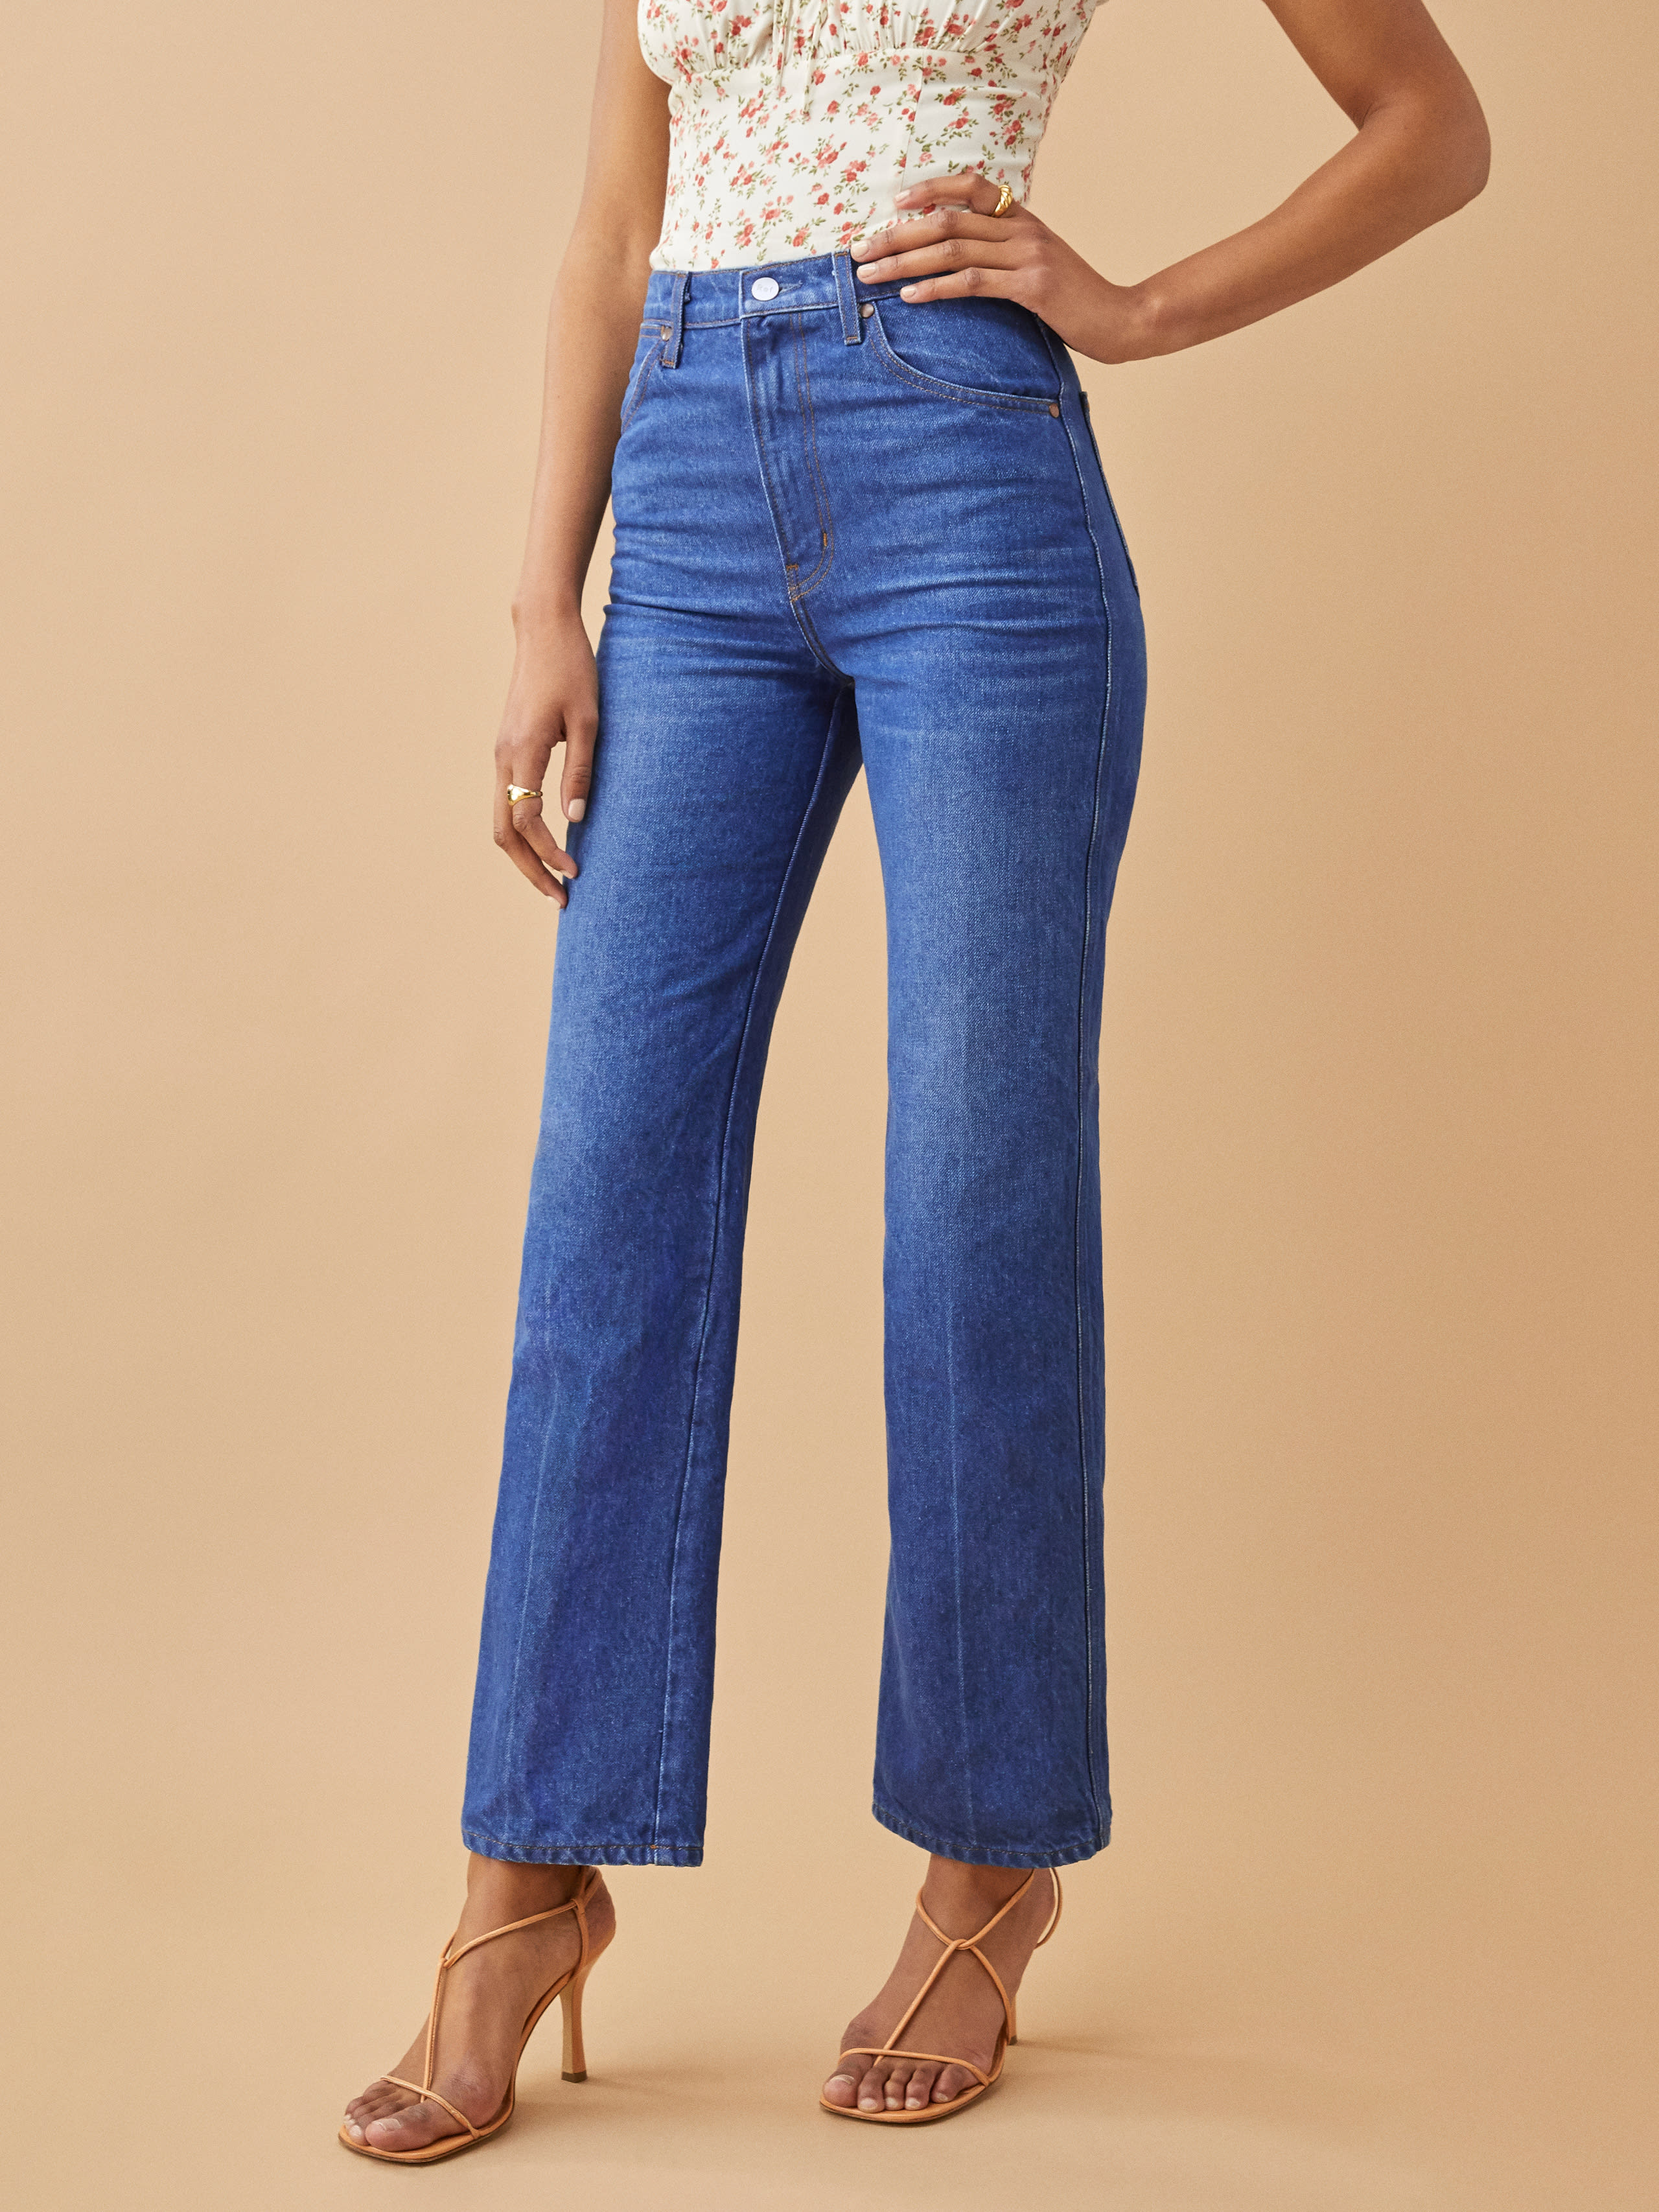 Cowboy High Rise Straight Jeans, thumbnail image 2